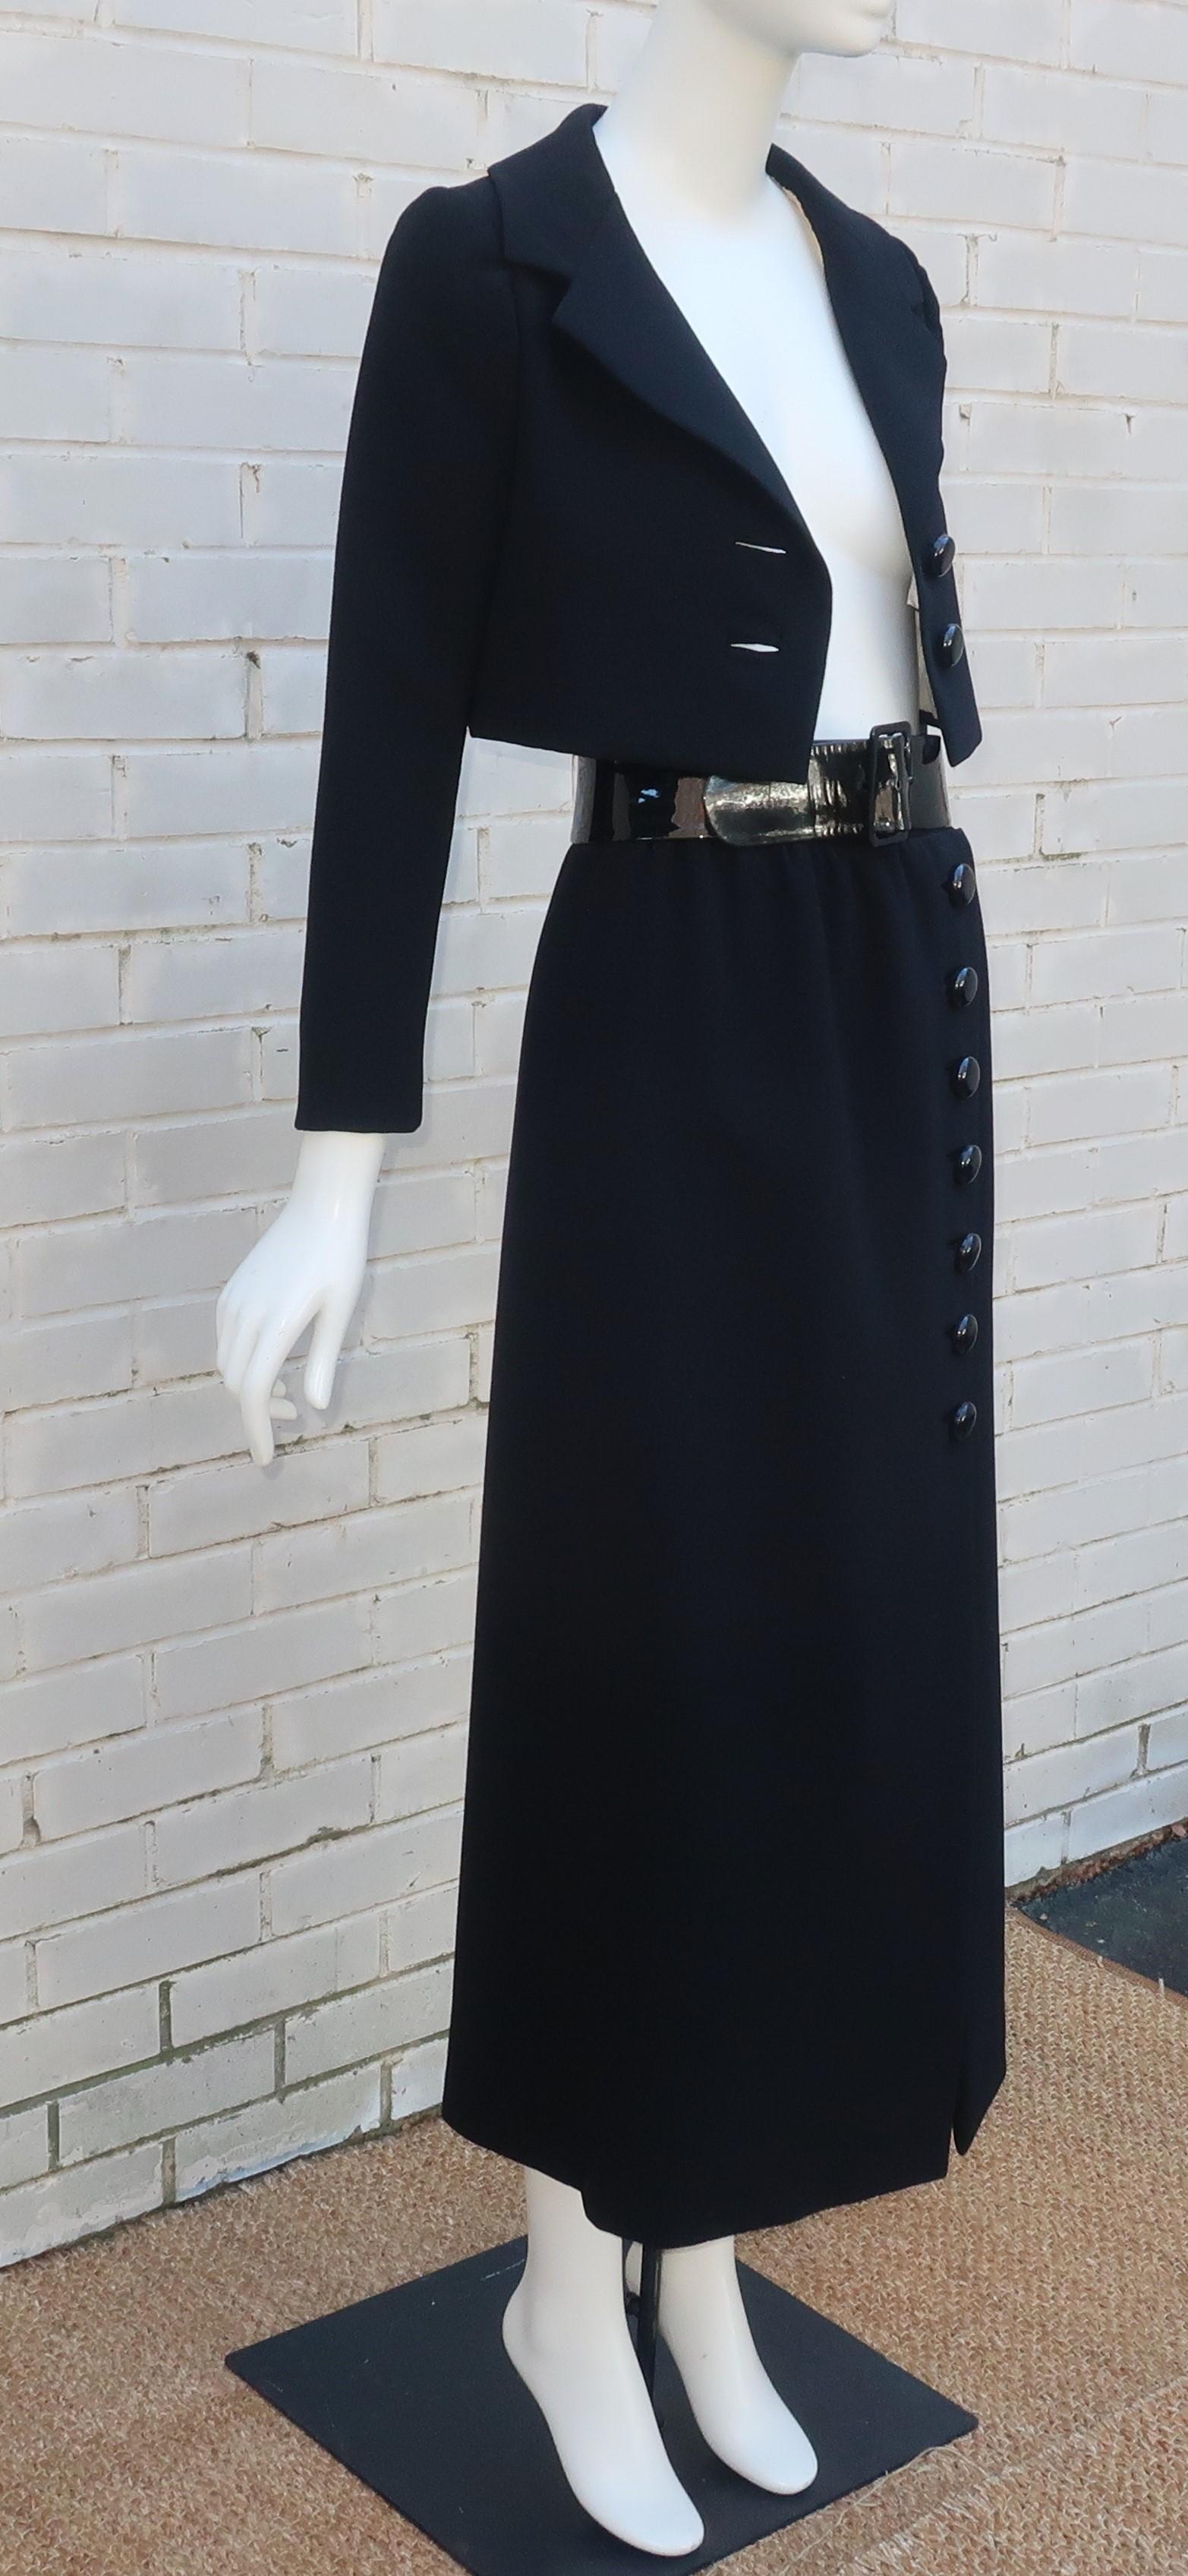 Norman Norell Belted Maxi Skirt Evening Suit With Cropped Jacket, 1968 For Sale 2